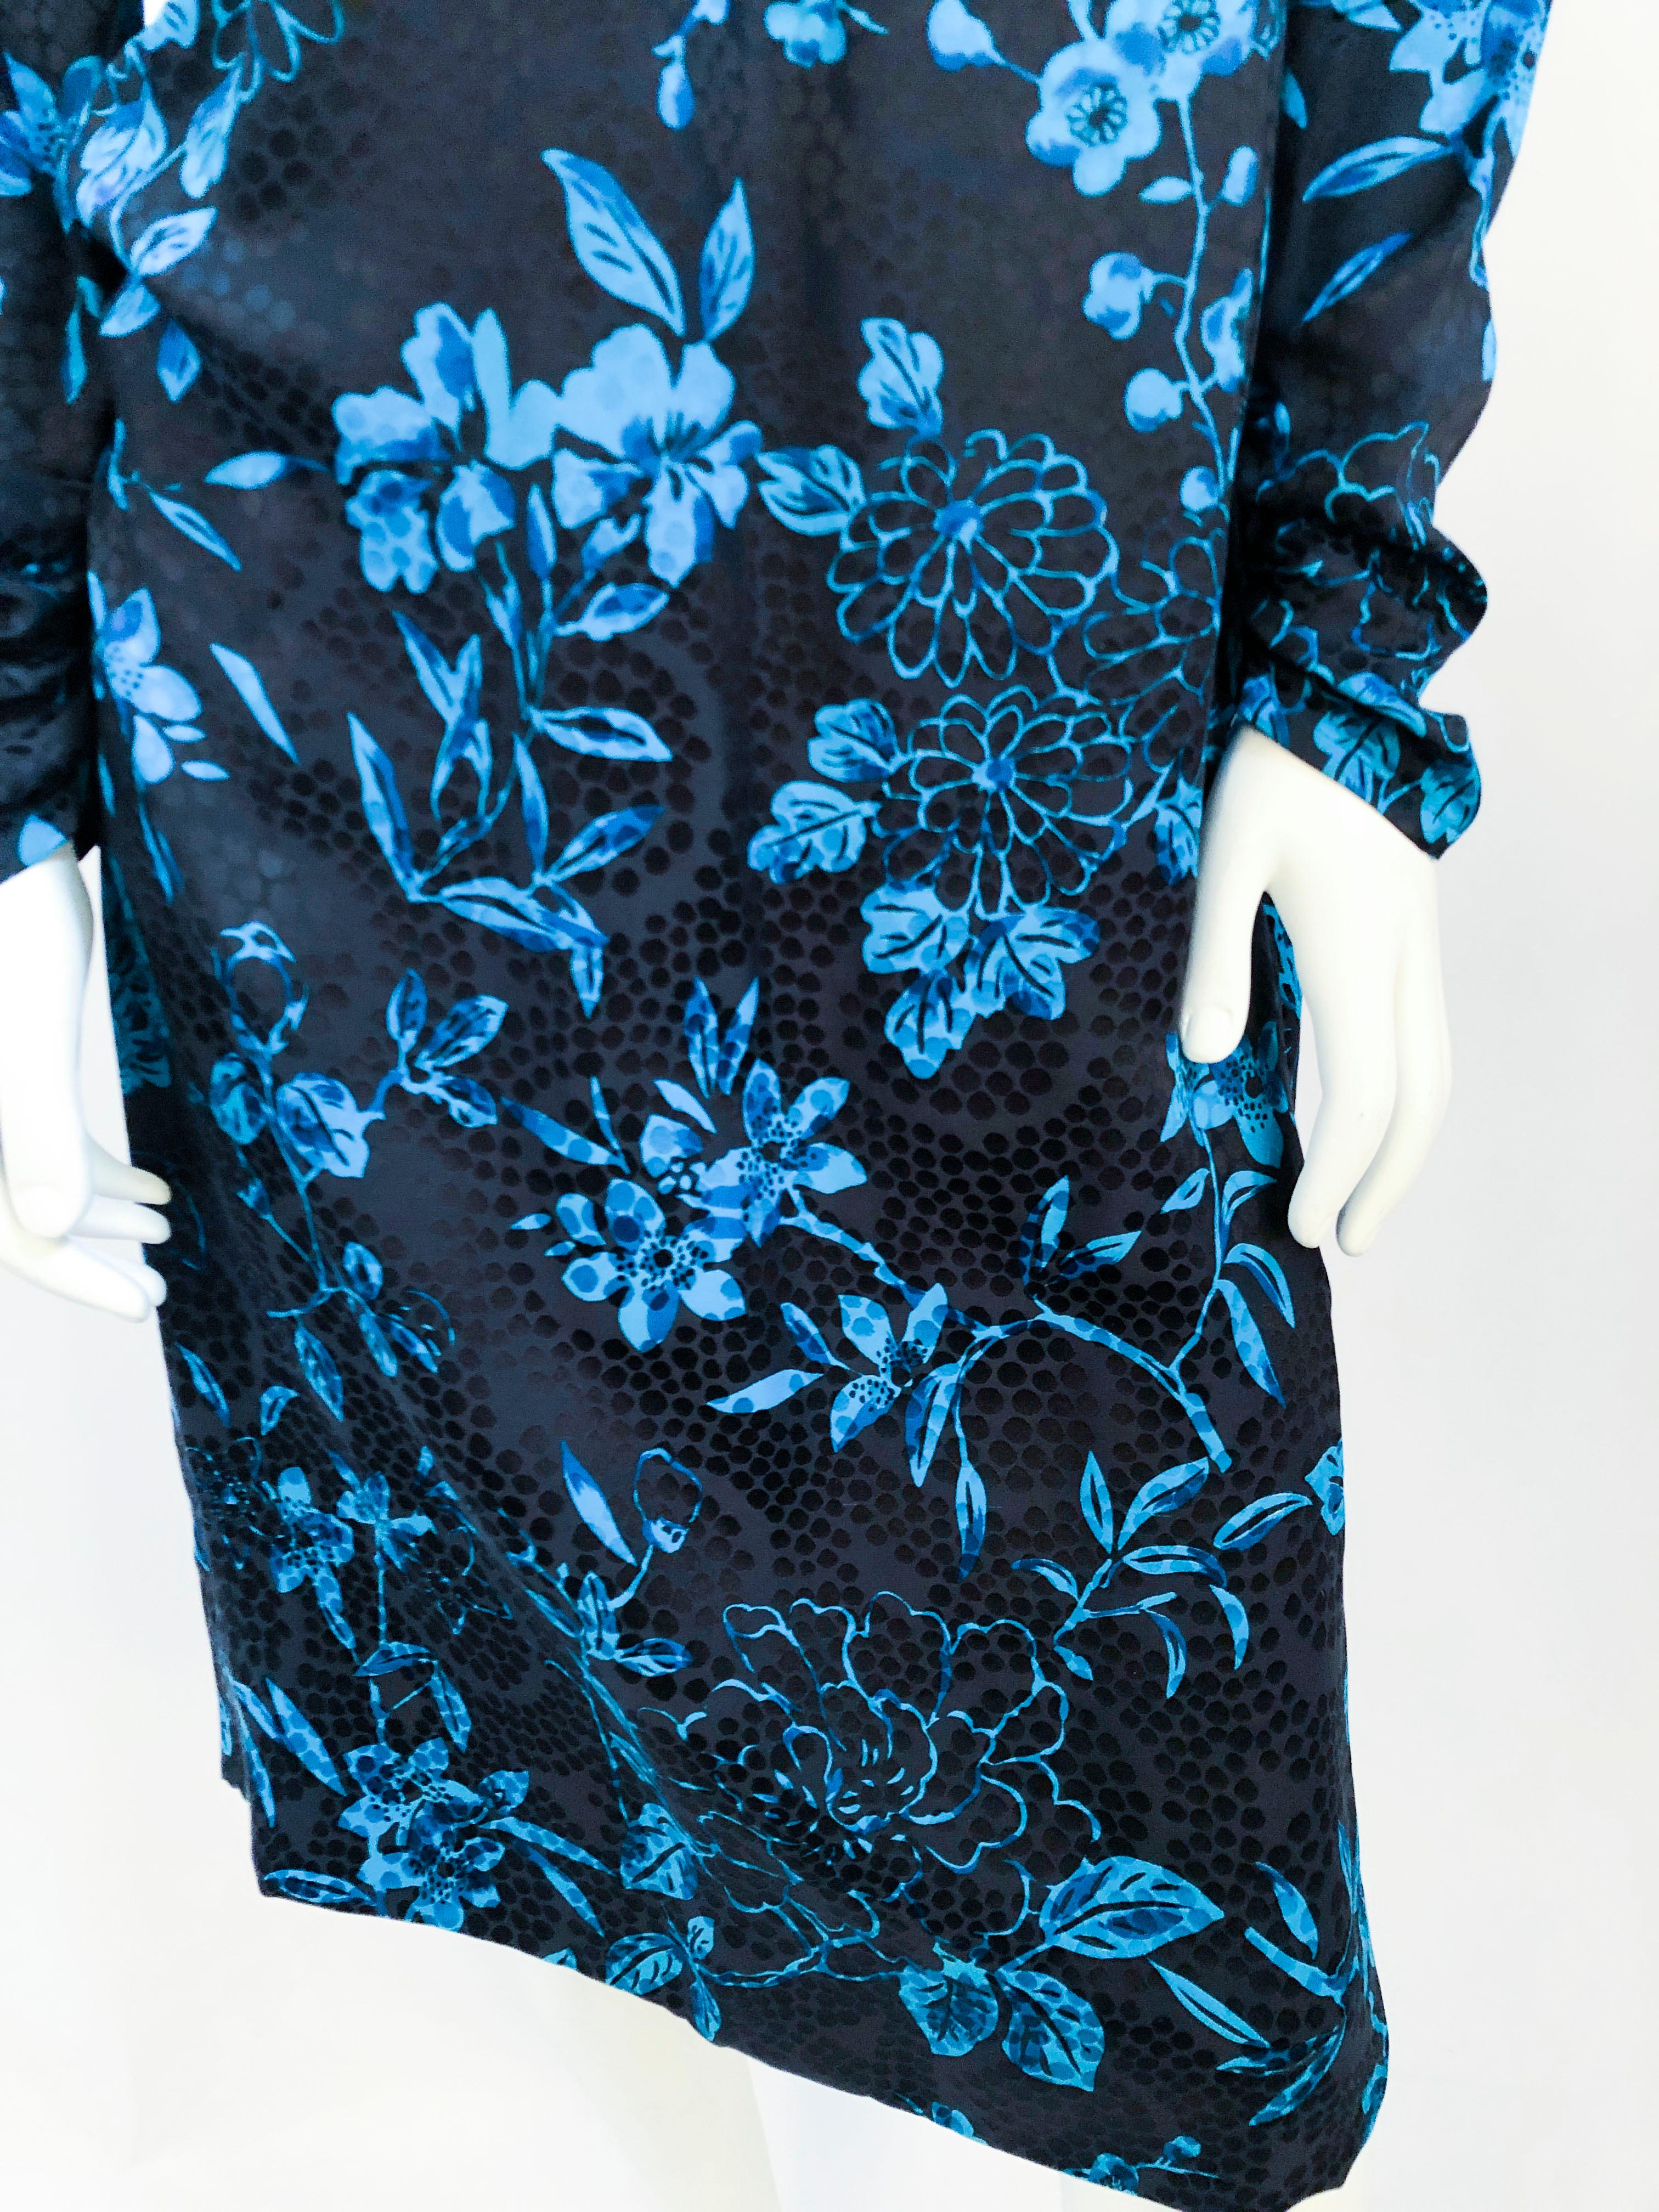 !970's silk floral printed dress with blue-toned flowers and a black fore-color that makes the ornate pattern on the jacquard. The dress also has a high collar that is roused on the face that crates a gathered effect on the entire dress. The long